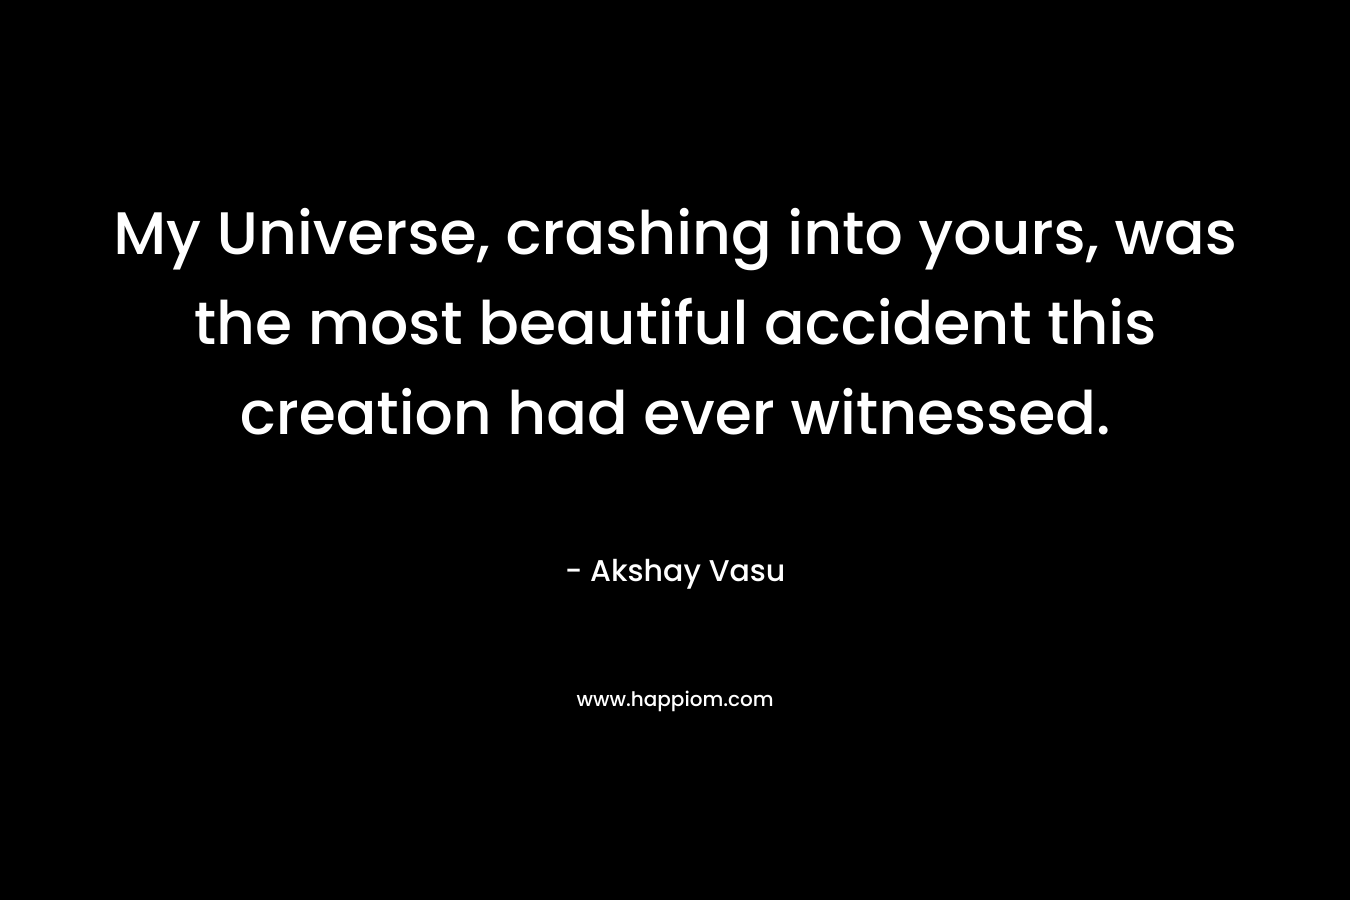 My Universe, crashing into yours, was the most beautiful accident this creation had ever witnessed.